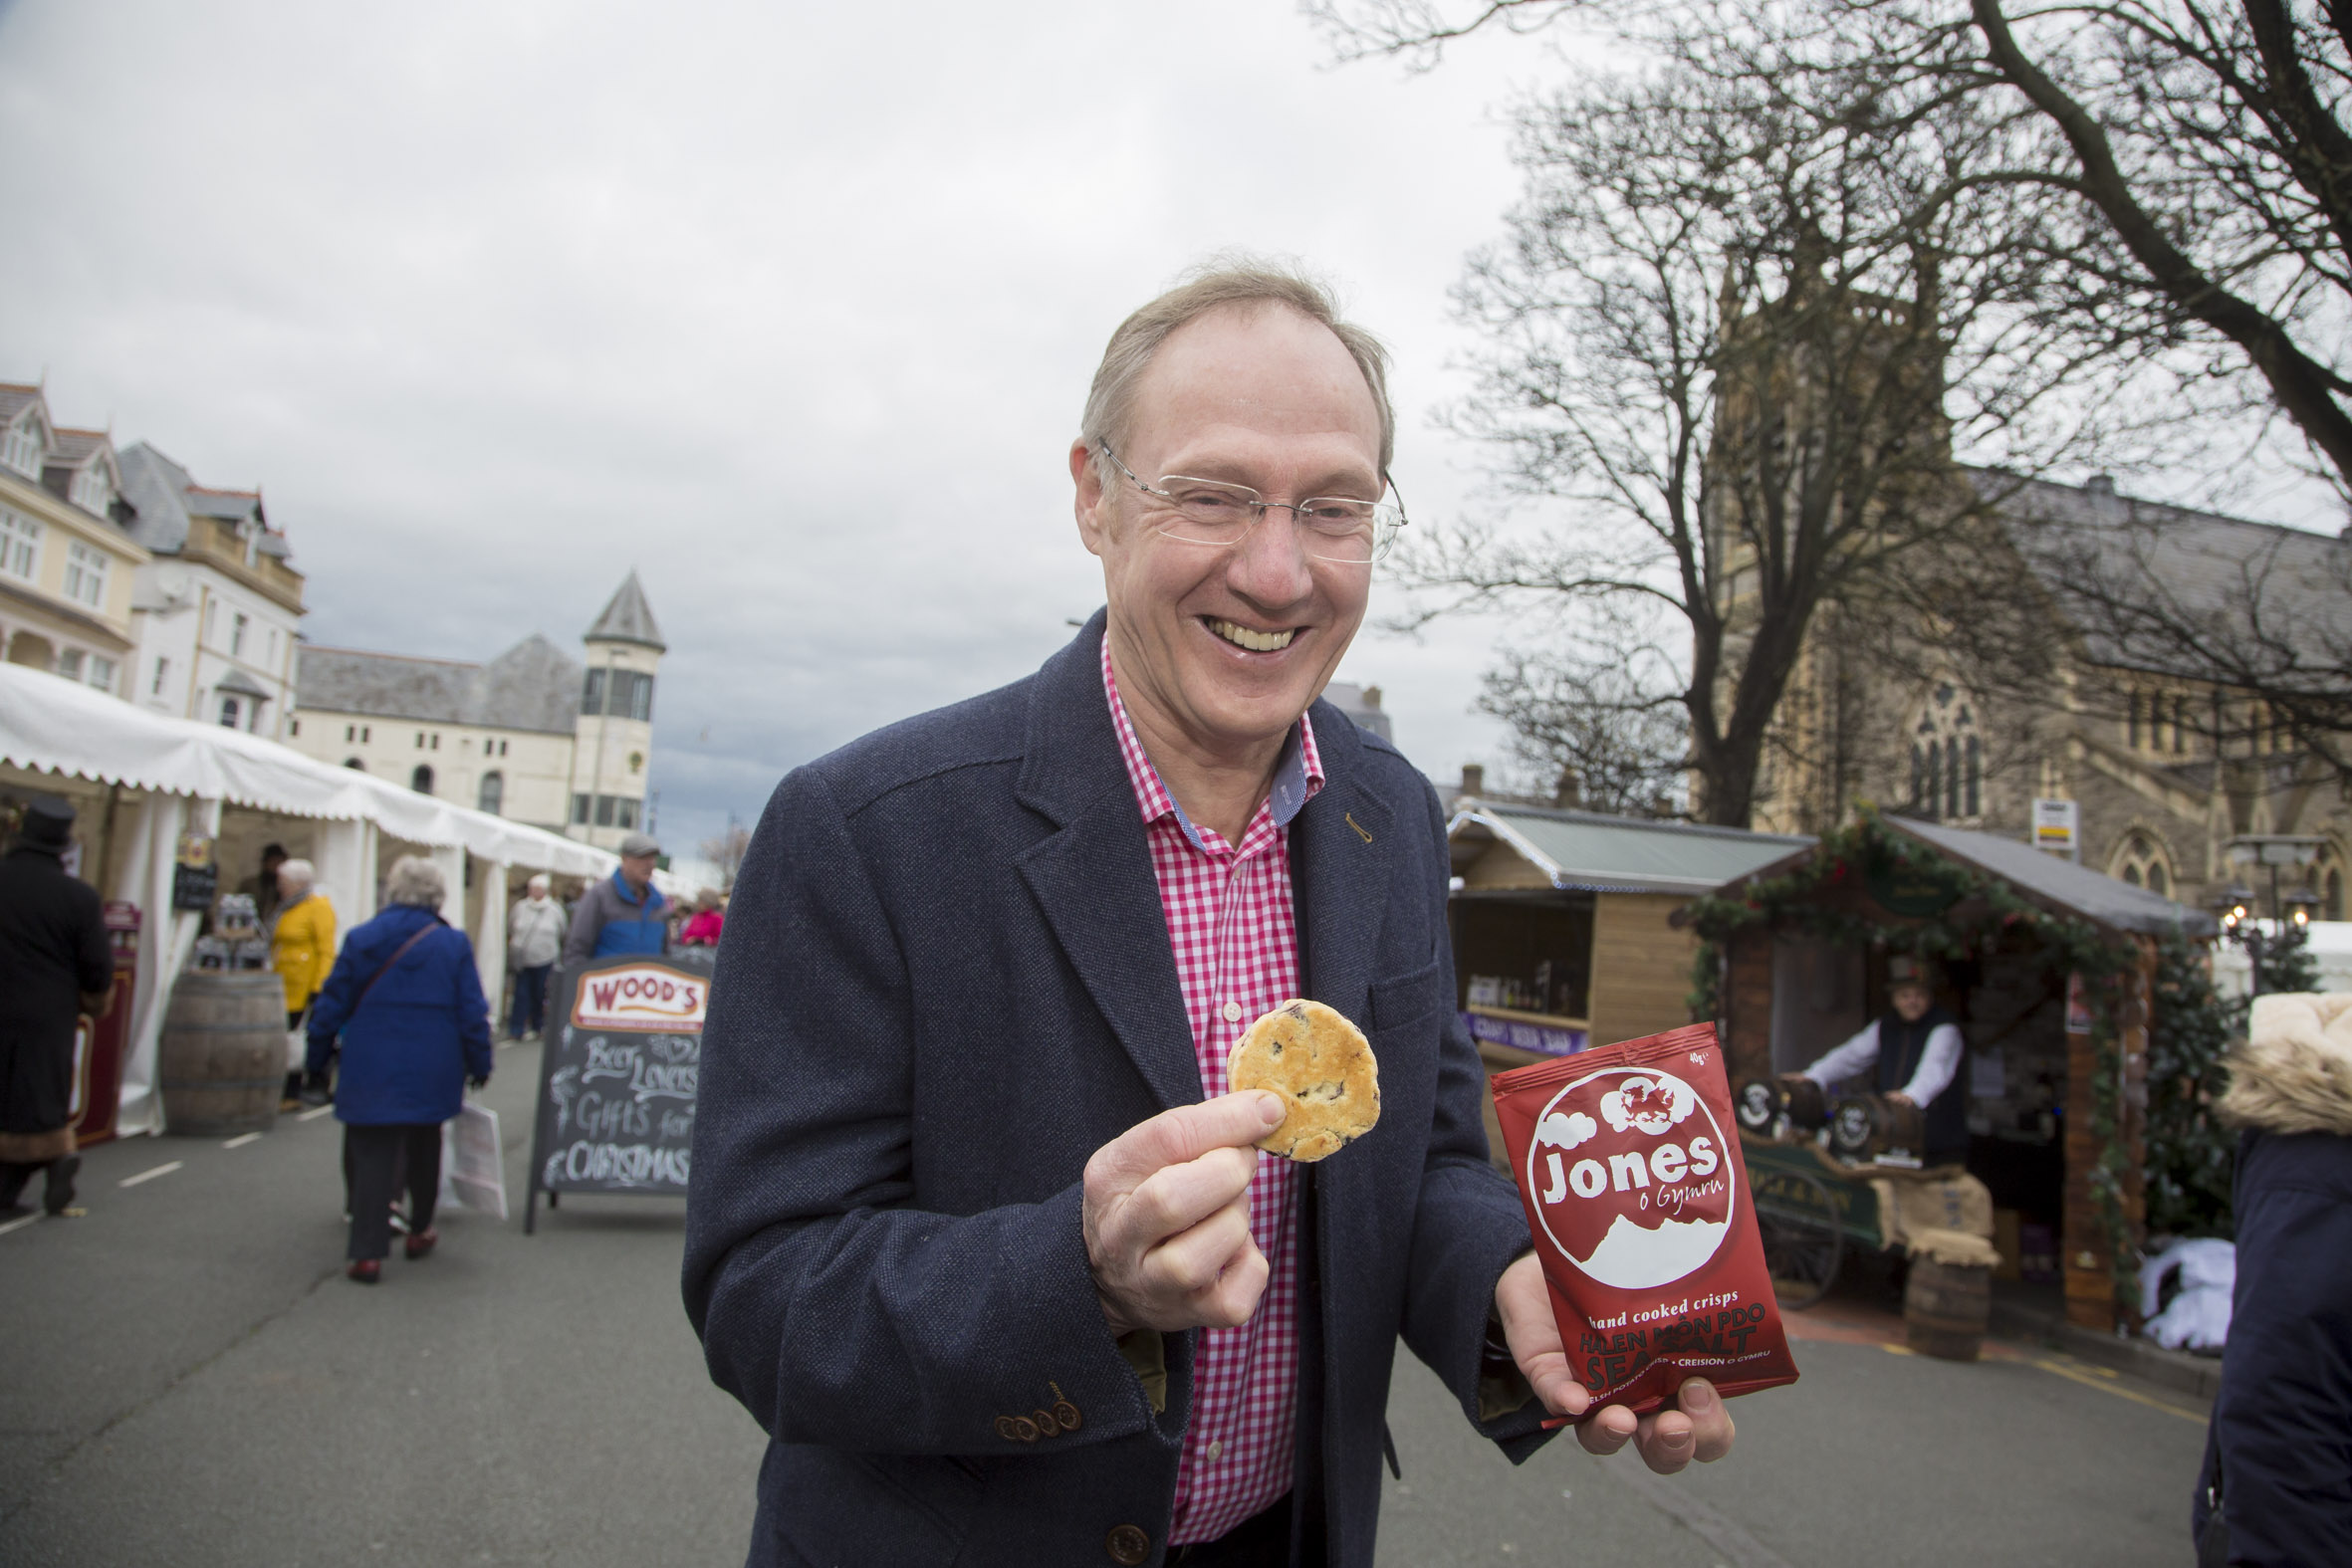 World champion Welsh Cake maker is crowned